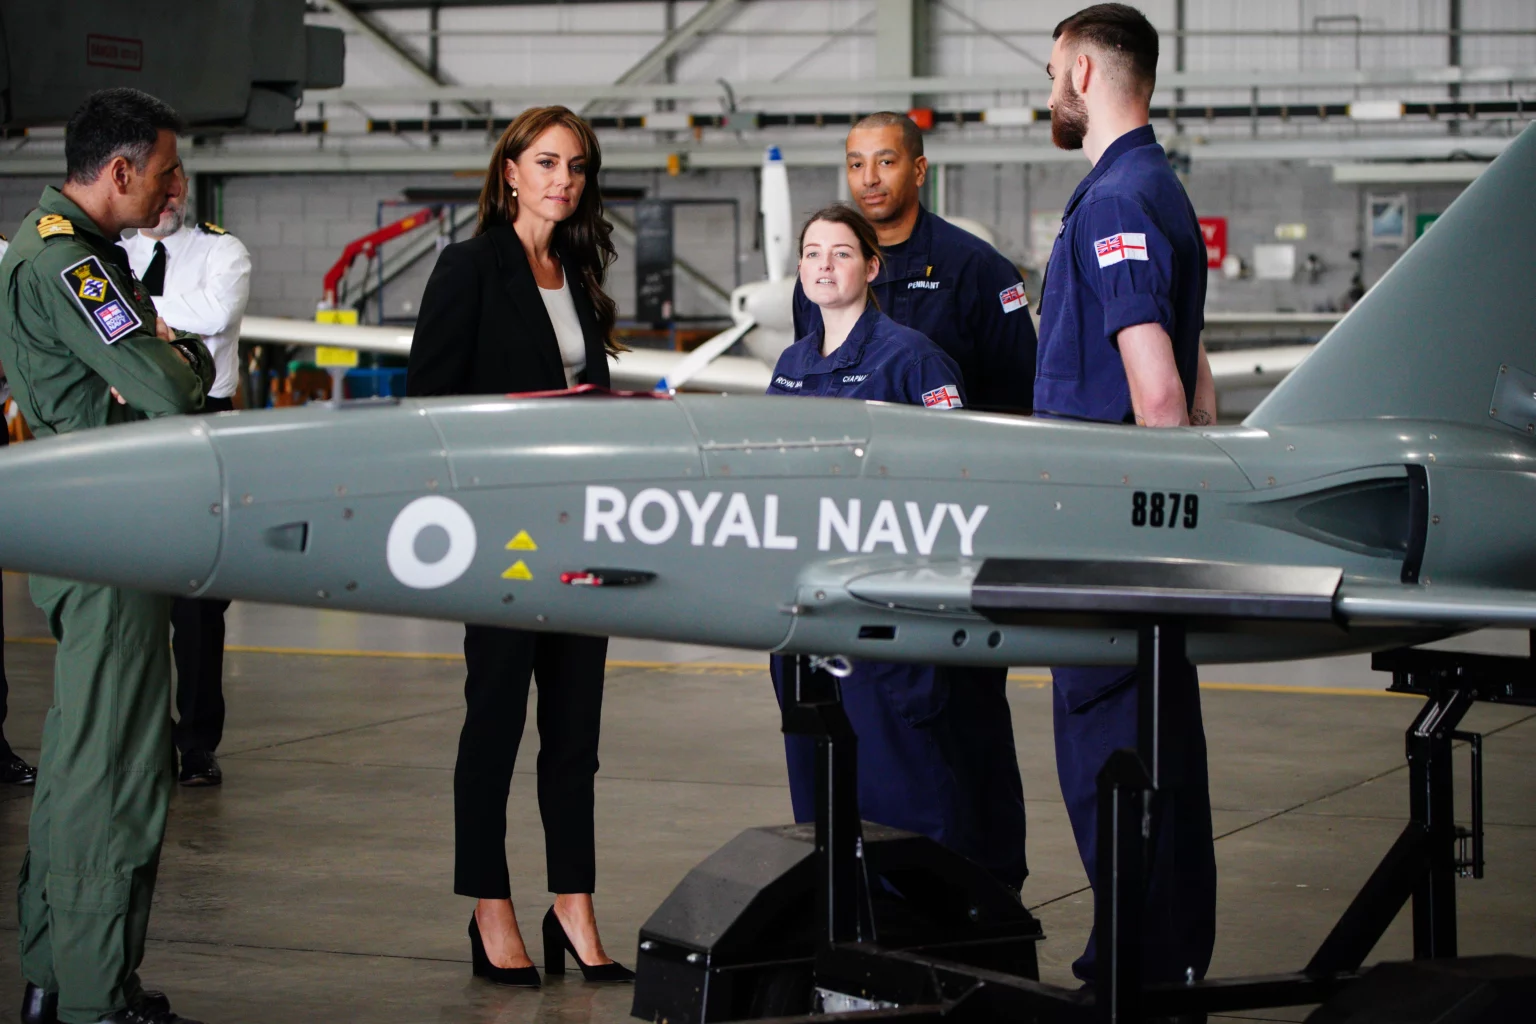 kate-middleton-marking-her-first-outing-for-the-first-time-with-a-new-military-title-given-by-king-charles